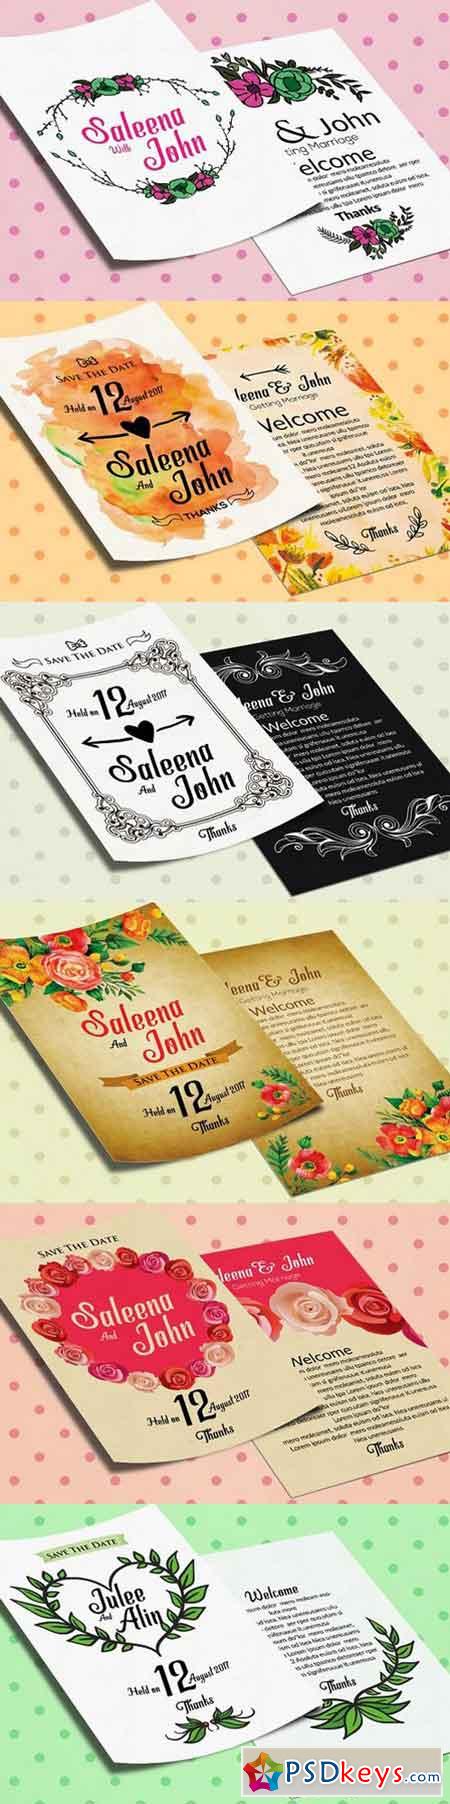 12 Double Sided Invitation Cards 1227745